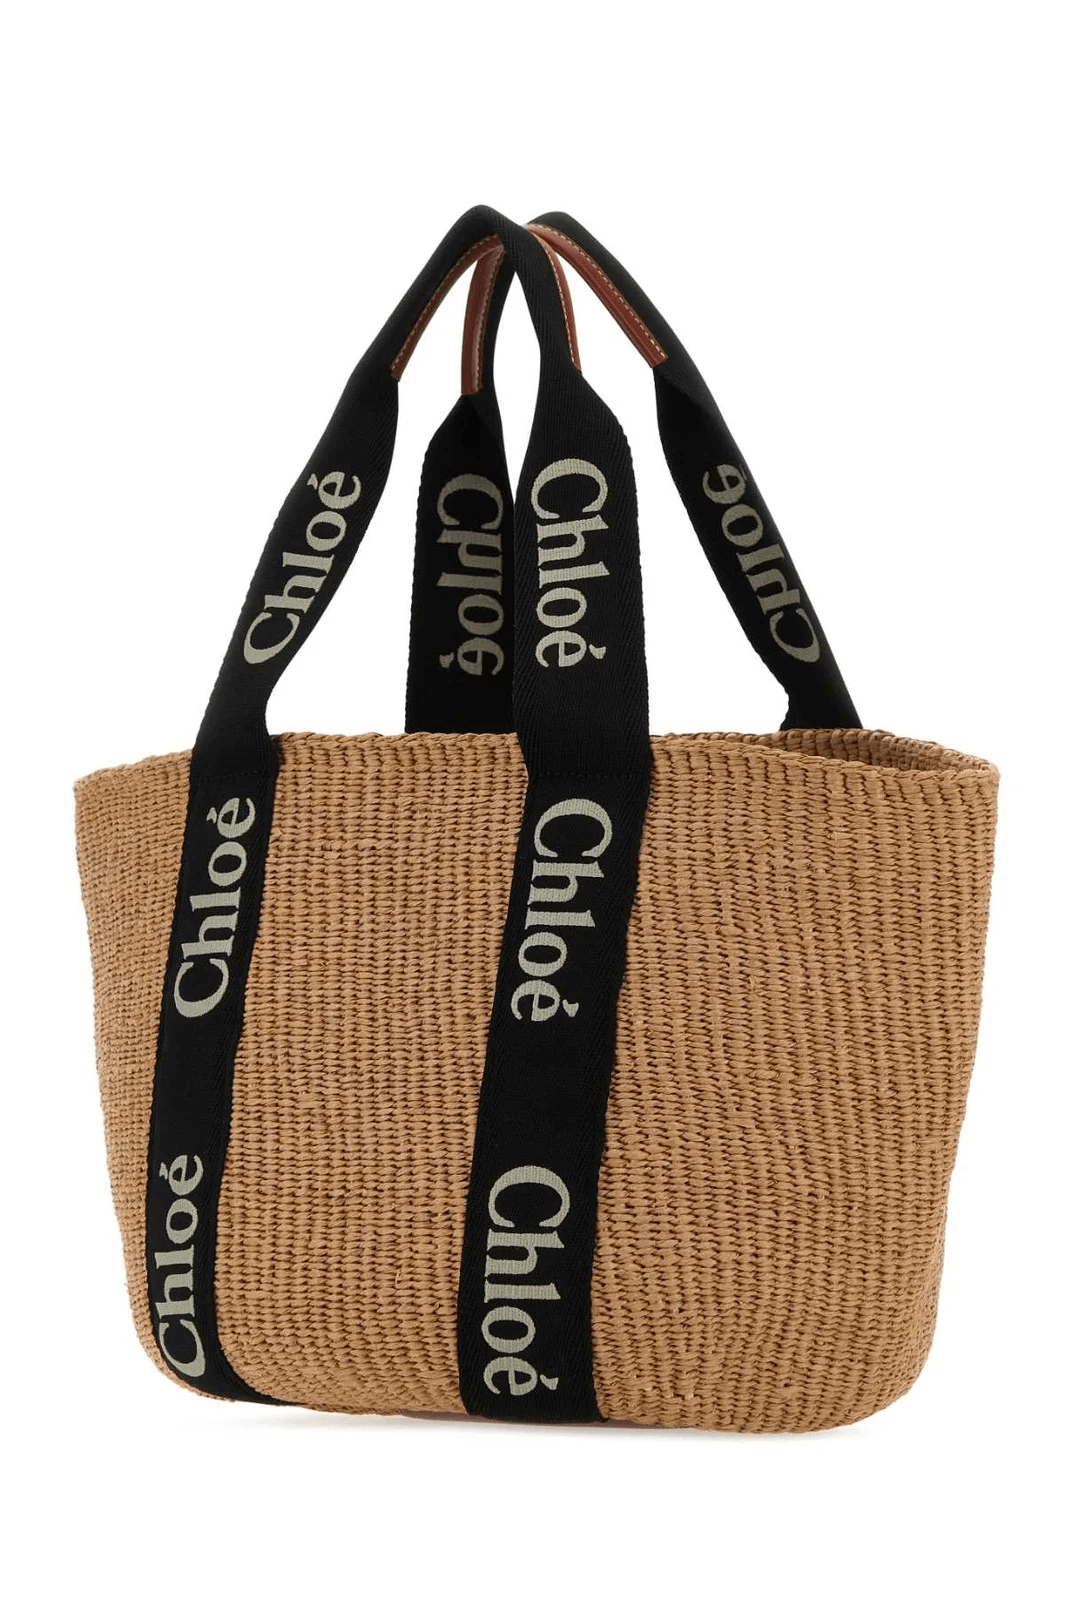 Chloé Woody Large Basket Bag in Black available at TNT The New Trend Australia.